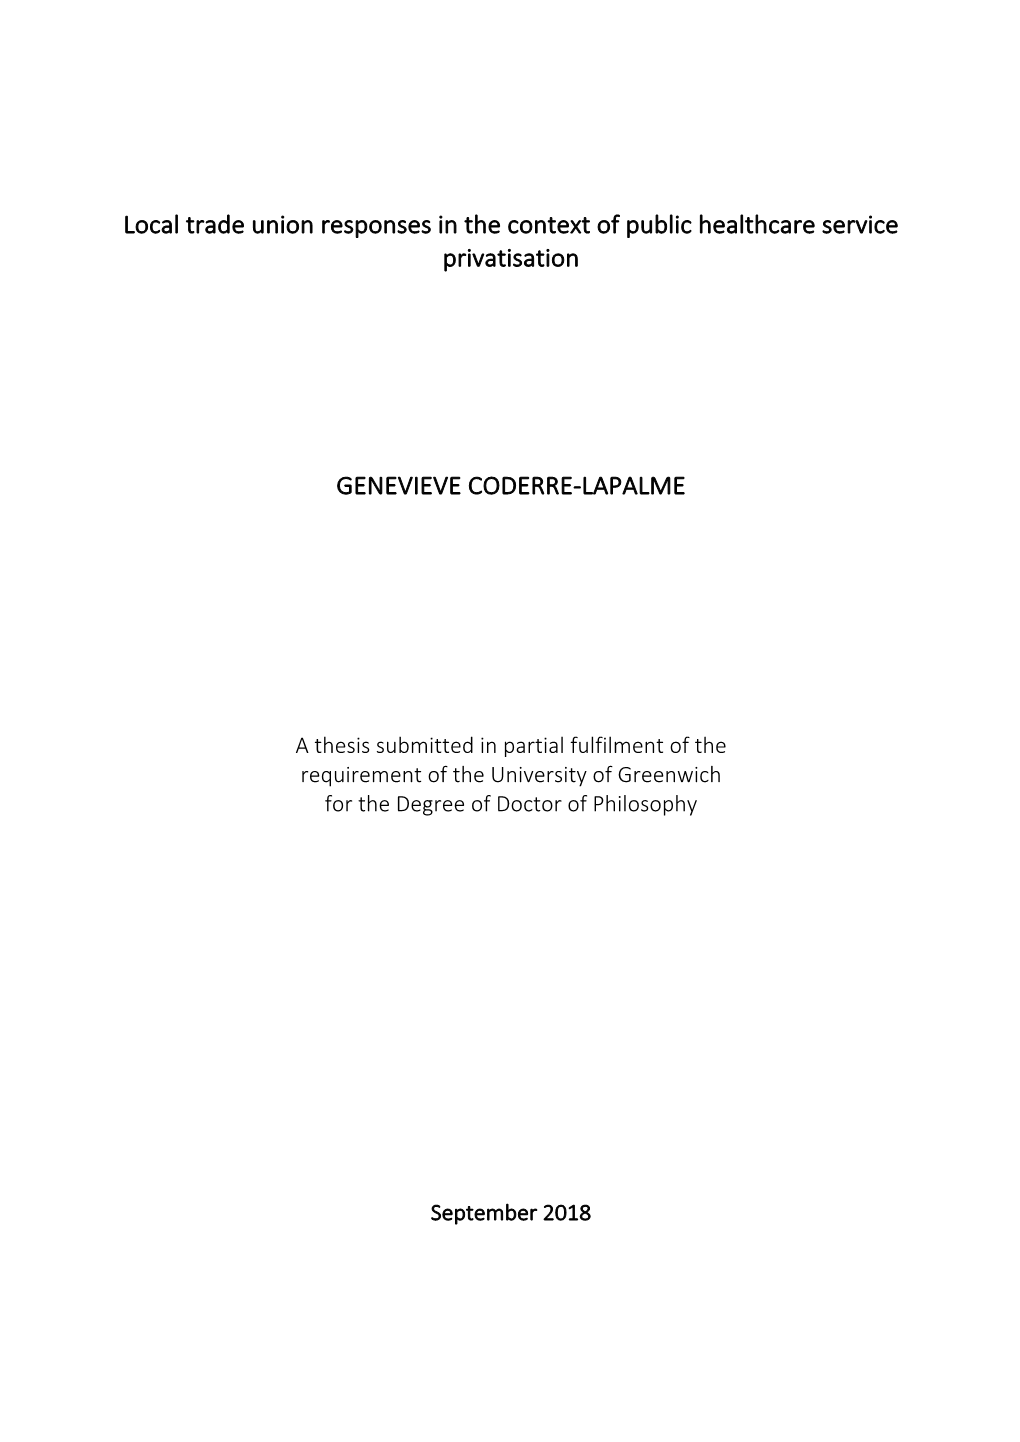 Local Trade Union Responses in the Context of Public Healthcare Service Privatisation